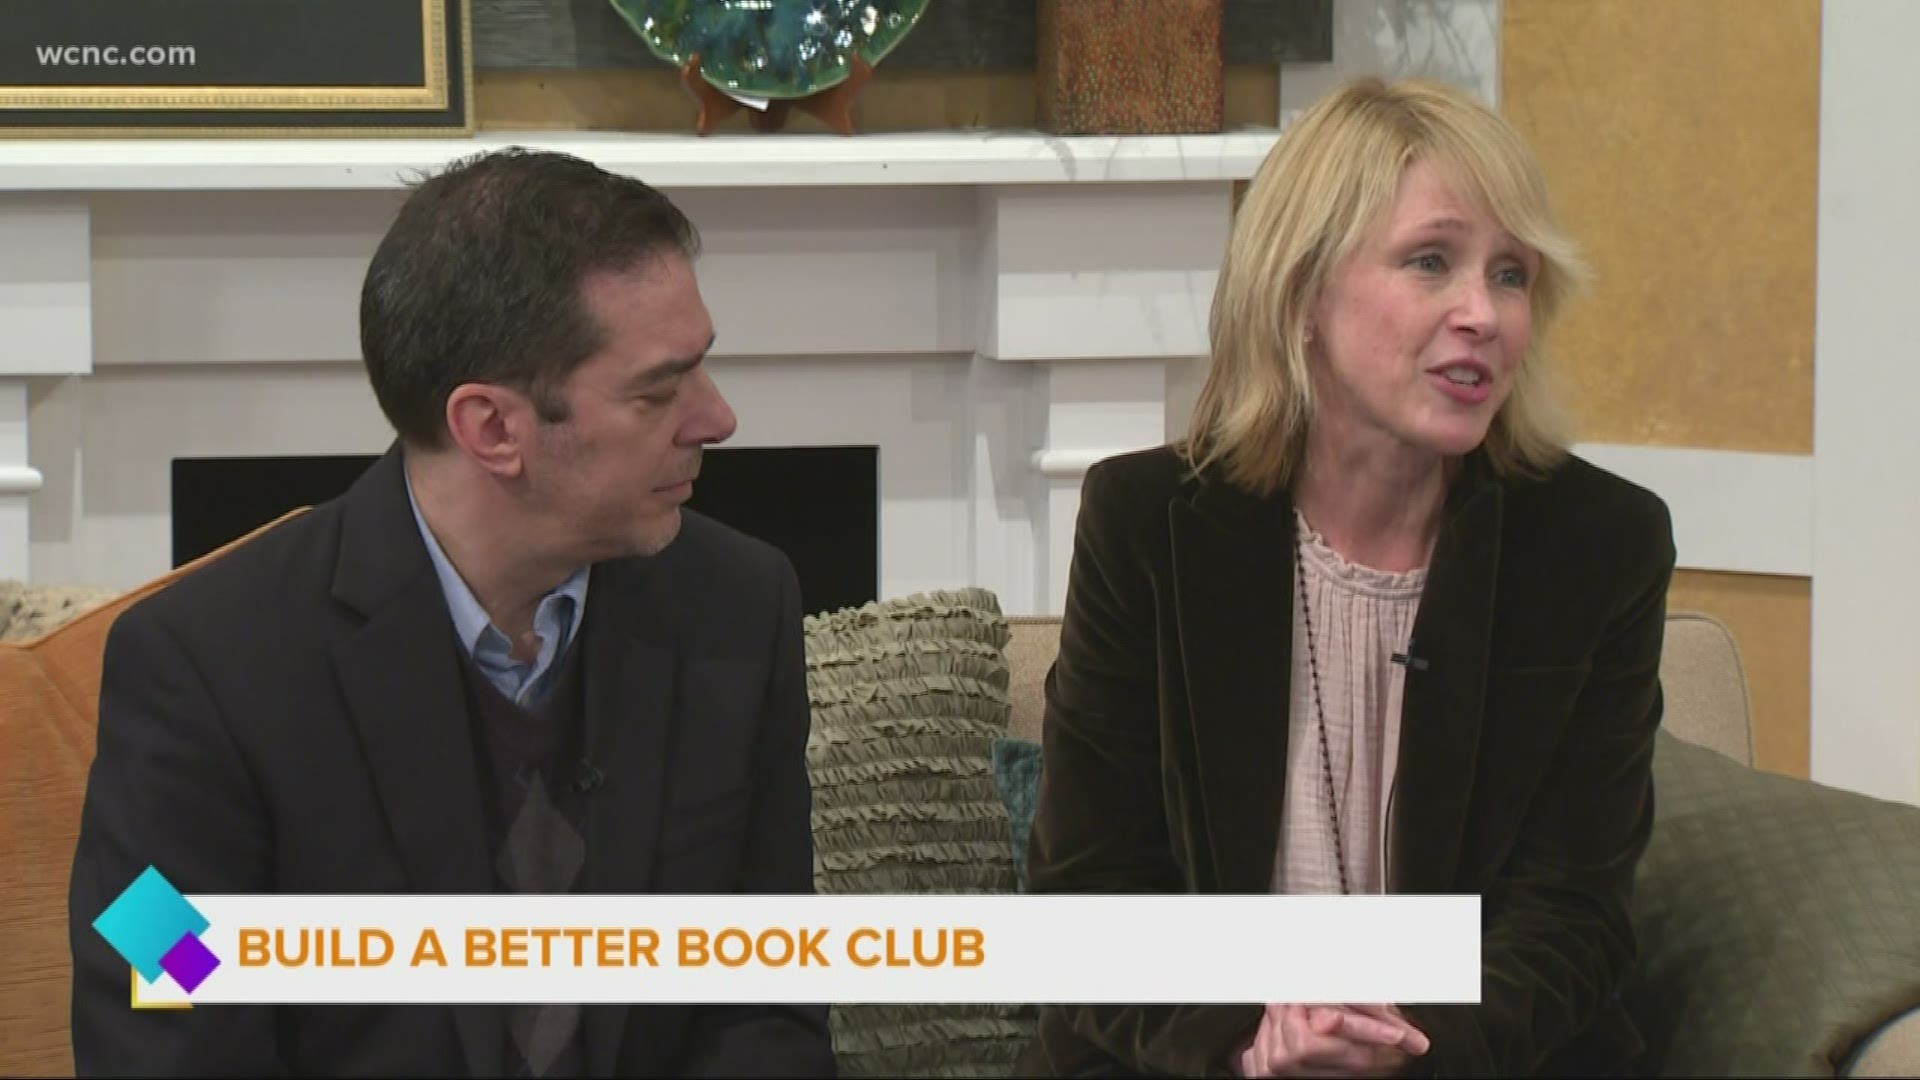 The owners of Charlotte Lit share how you can start a book club that fosters great reading and conversation.